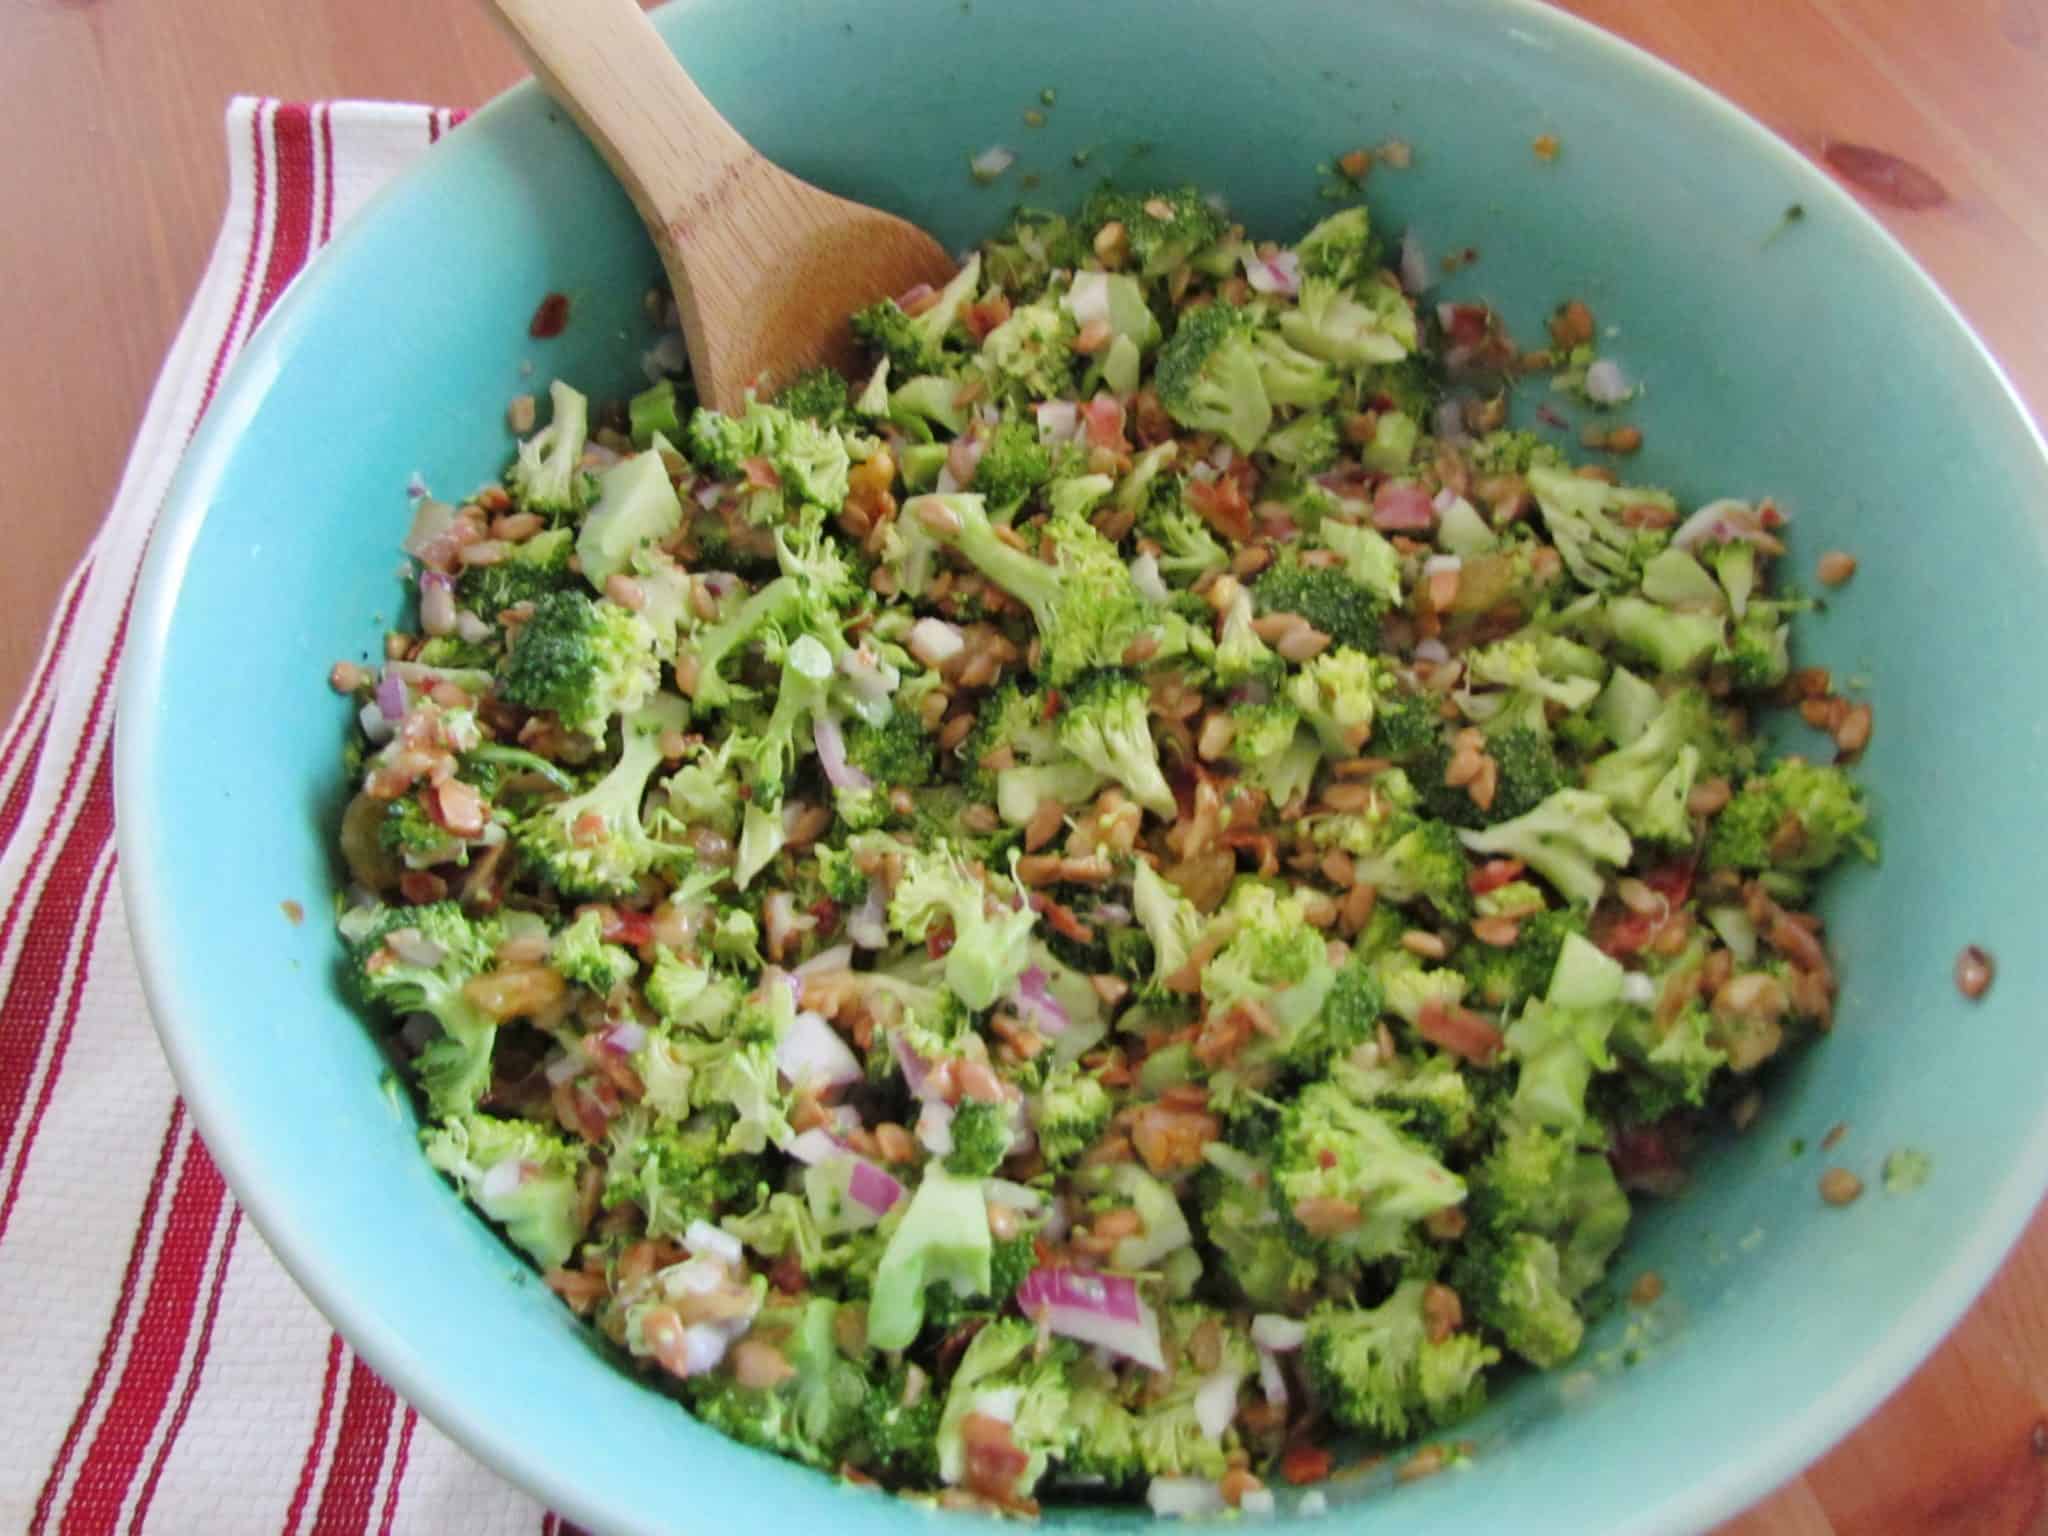 fresh broccoli florets, diced red onions, bacon, creamy mayonnaise dressing stirred together with a wooden spoon in a blue bowl.